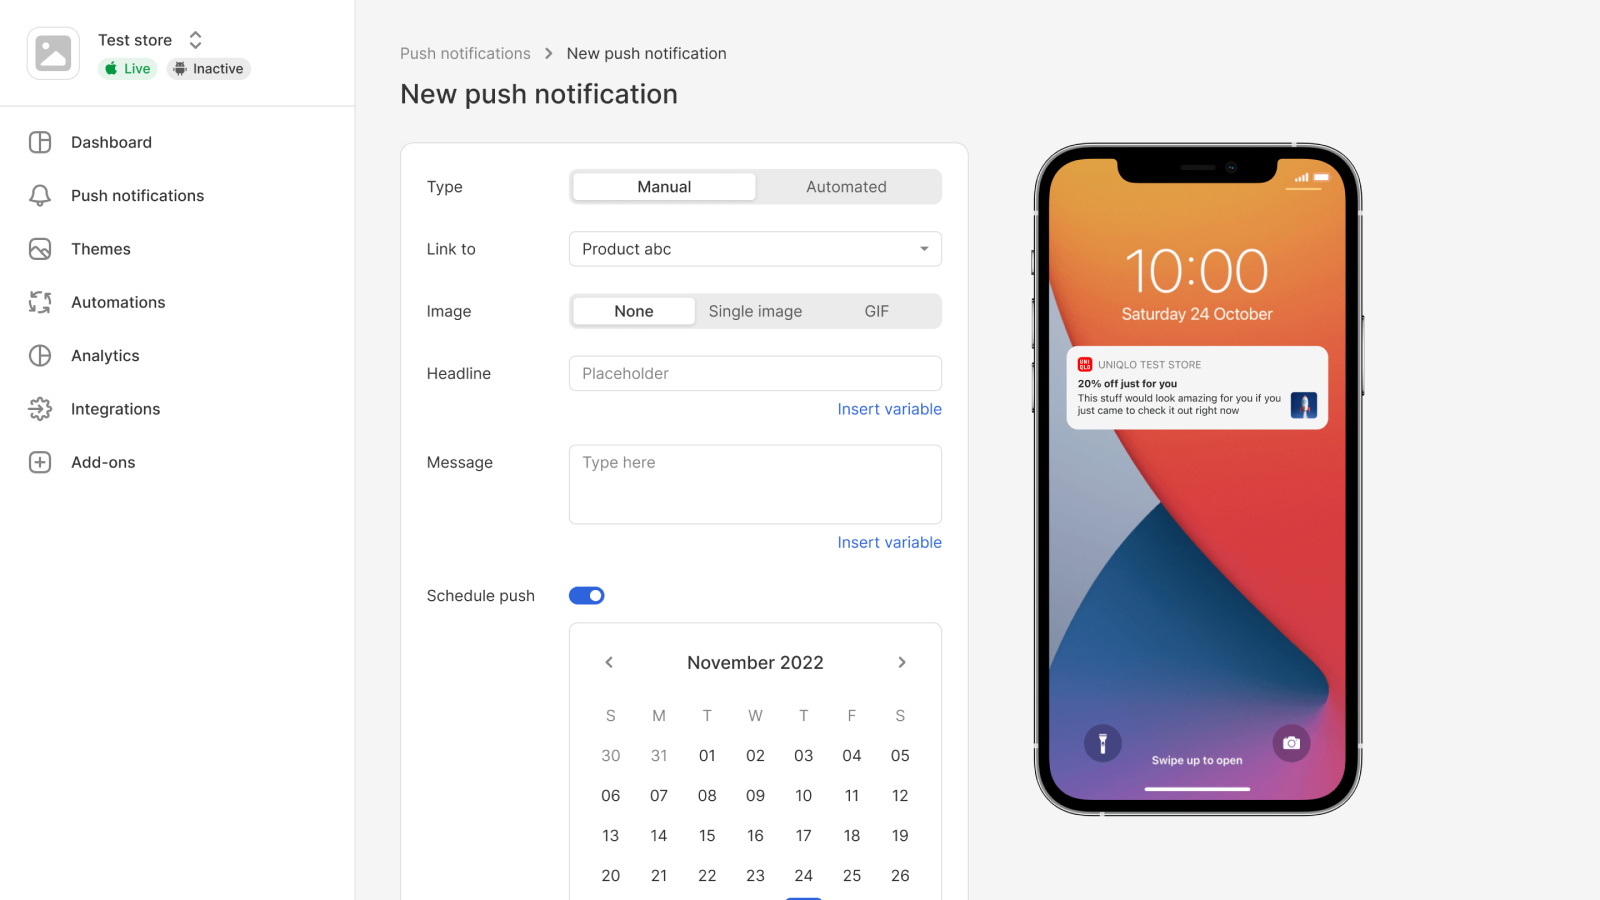 Send an unlimited number of push notifications free